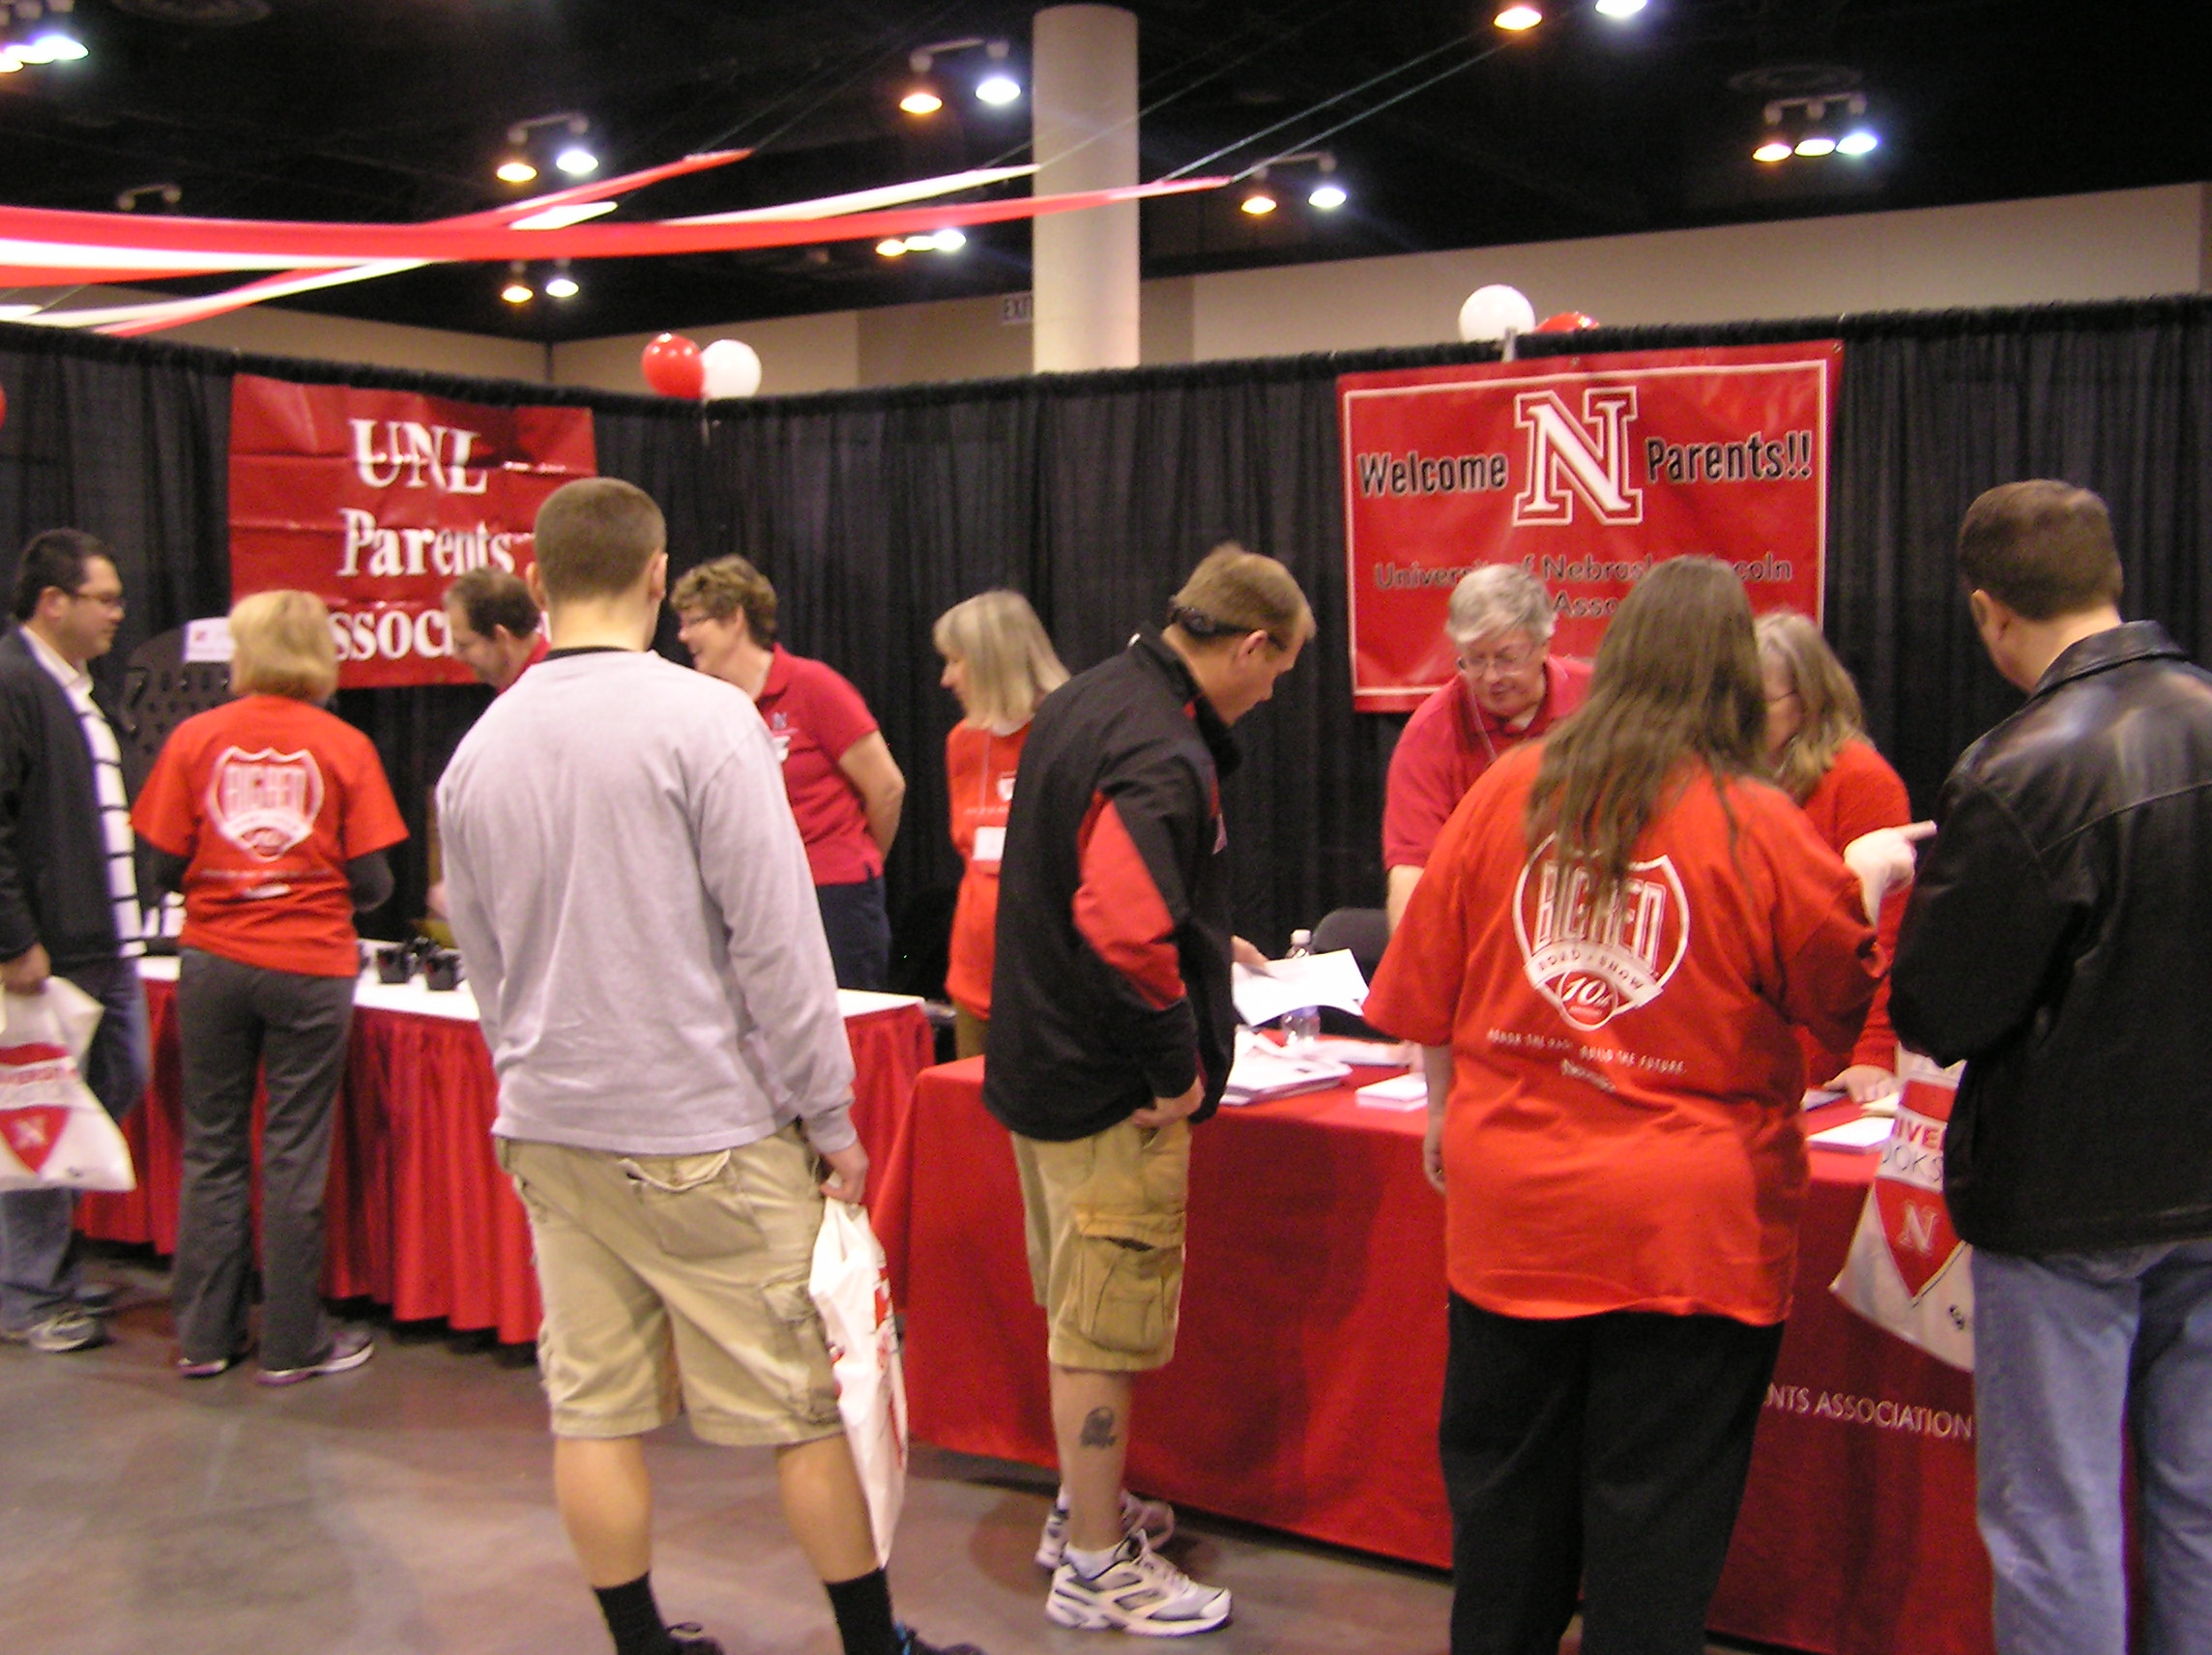 UNL Big Red Road Show, March 4, 2012